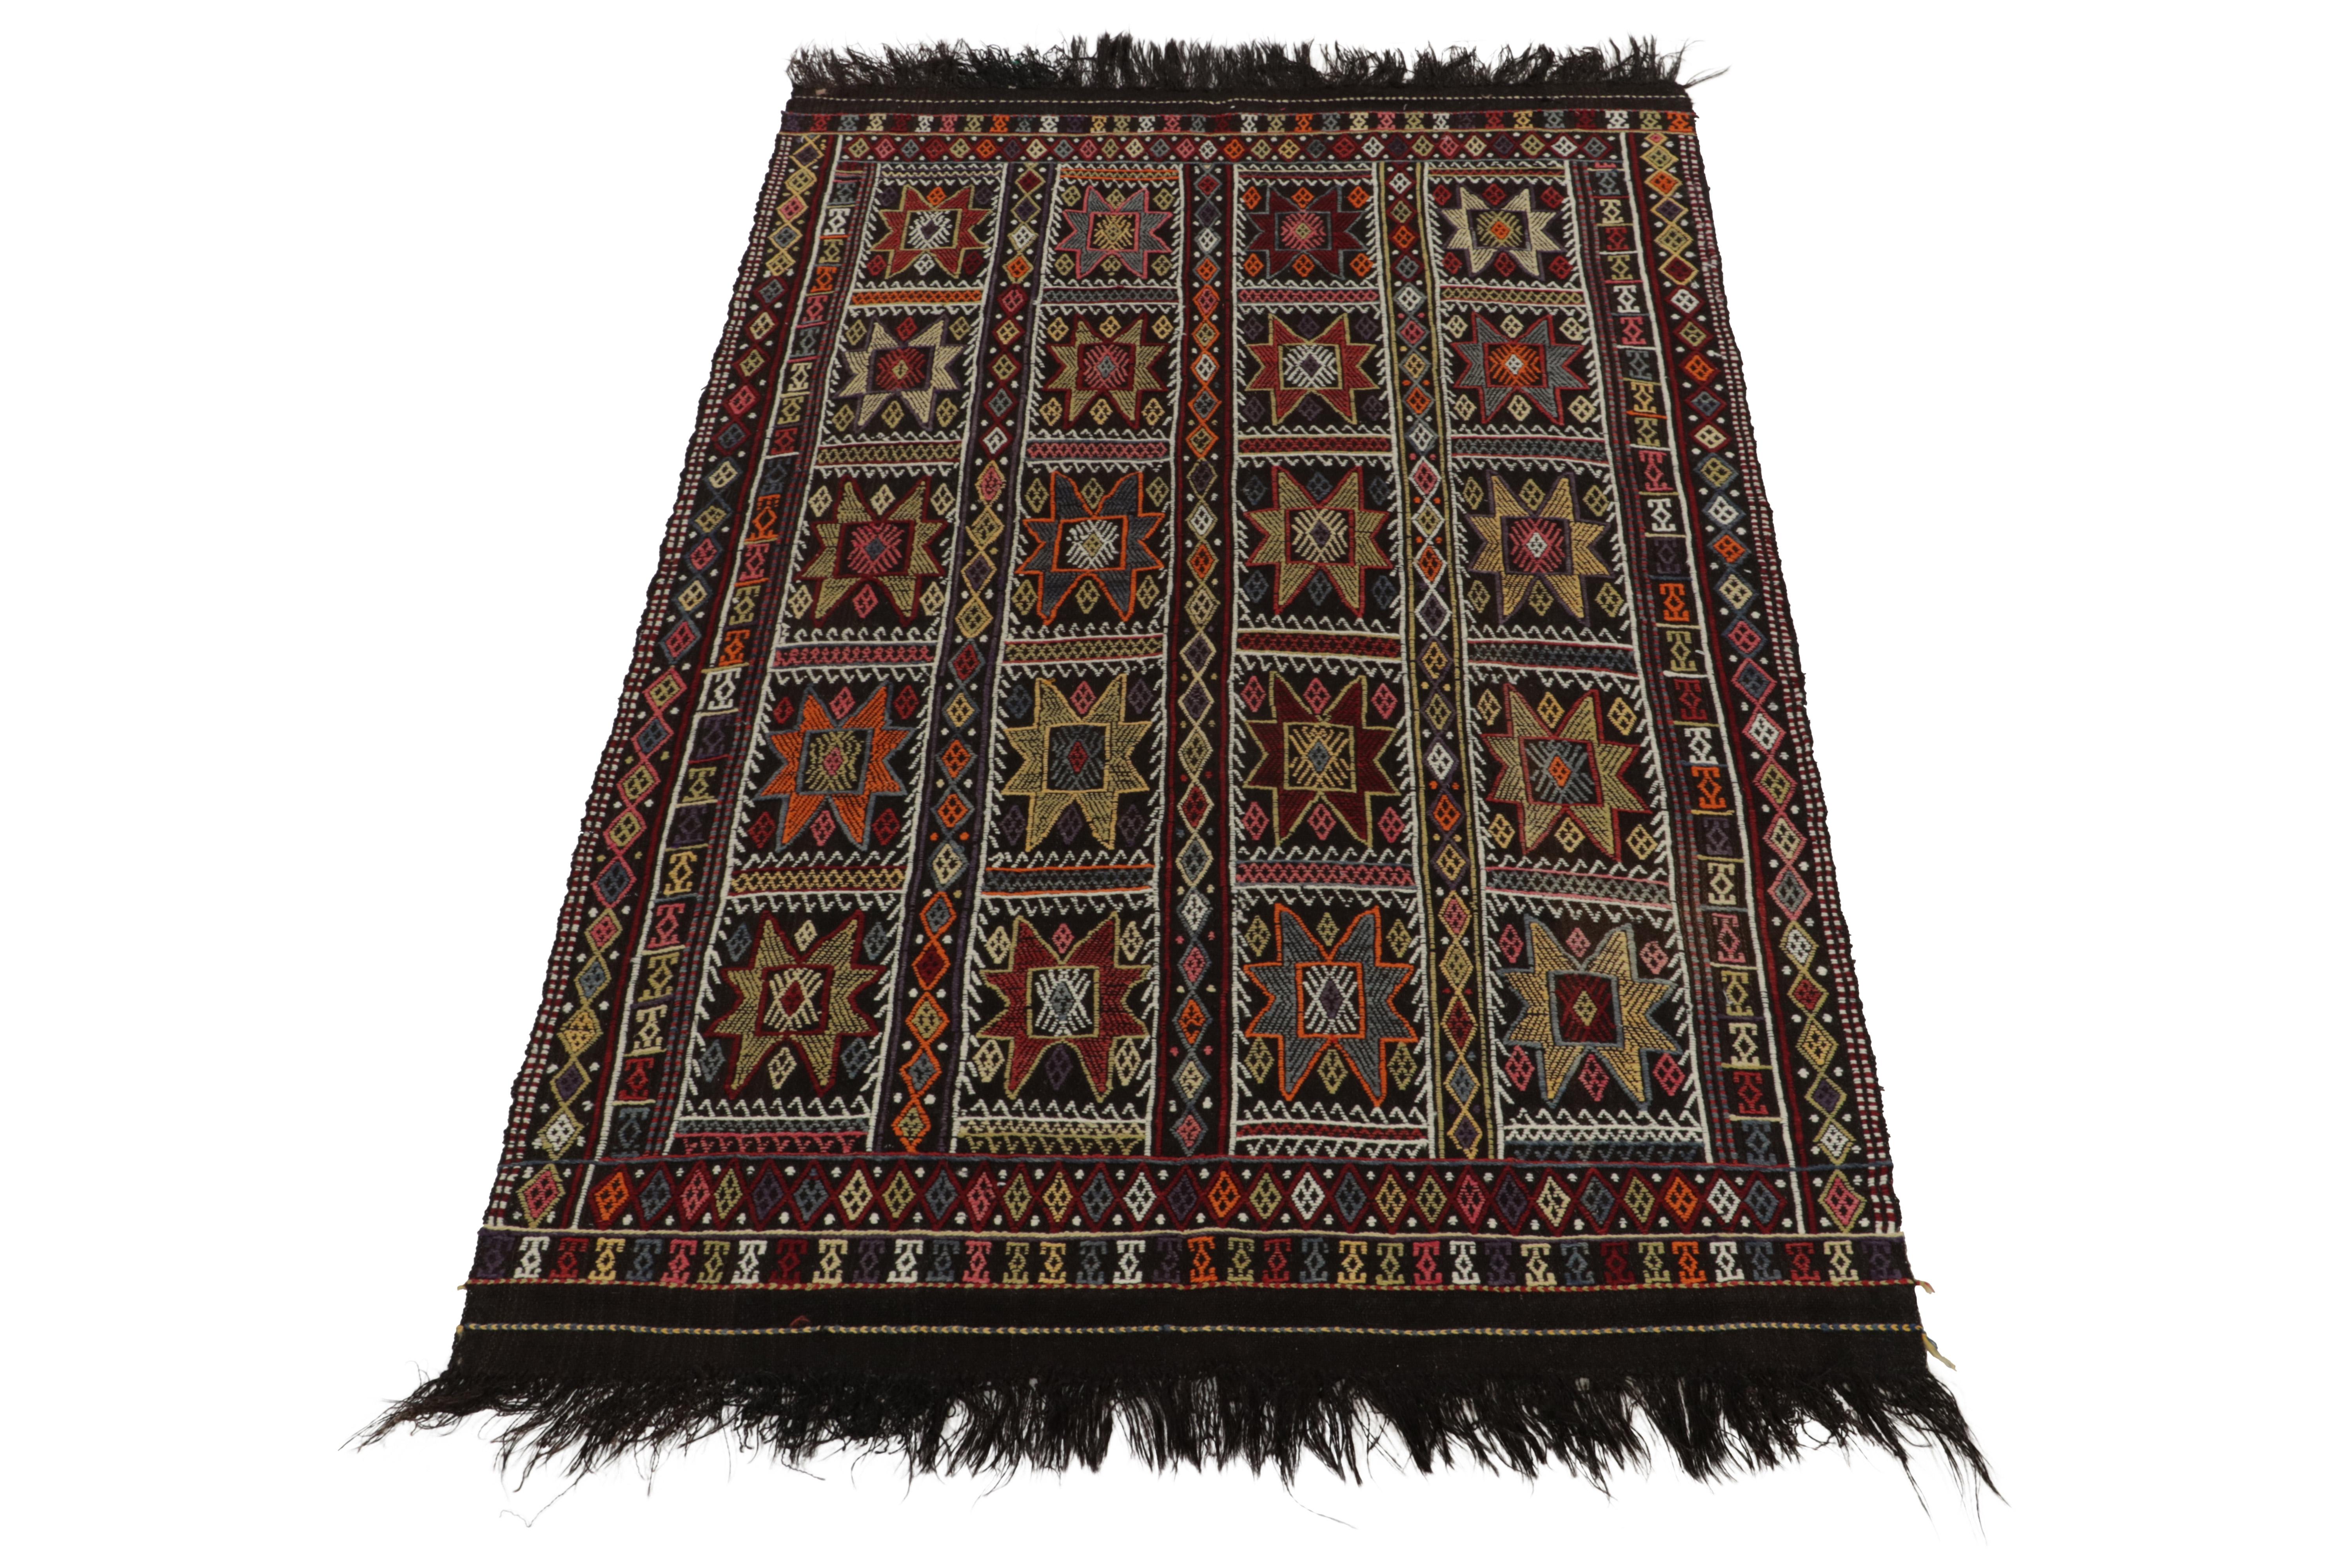 A vintage Kilim rug in 5x8, from the latest curation of the Cecim tribal rug family joining our acclaimed collection. Handwoven in wool from Turkey circa 1950-1960, enjoying a bold near-black background with textural geometric patterns in all-over